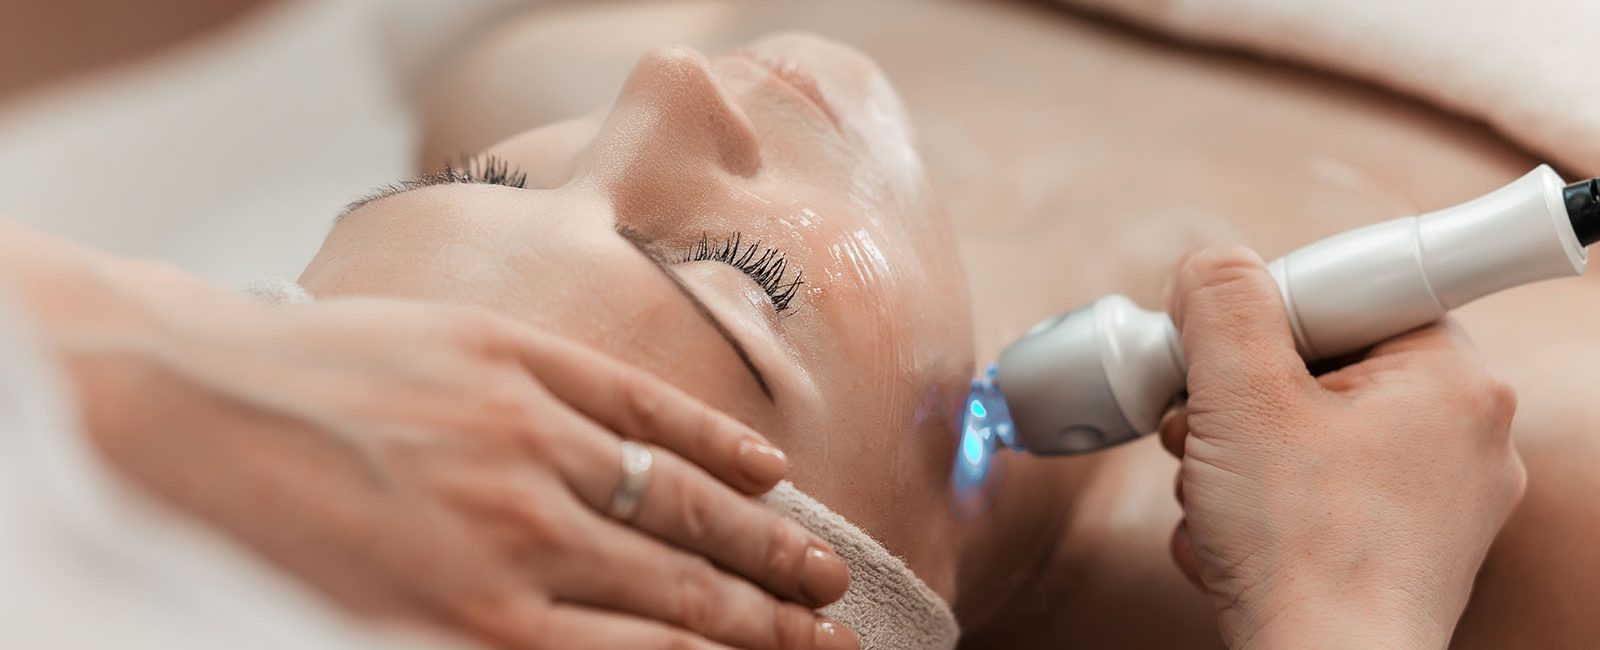 The Science Behind Cosmetic Laser Treatments